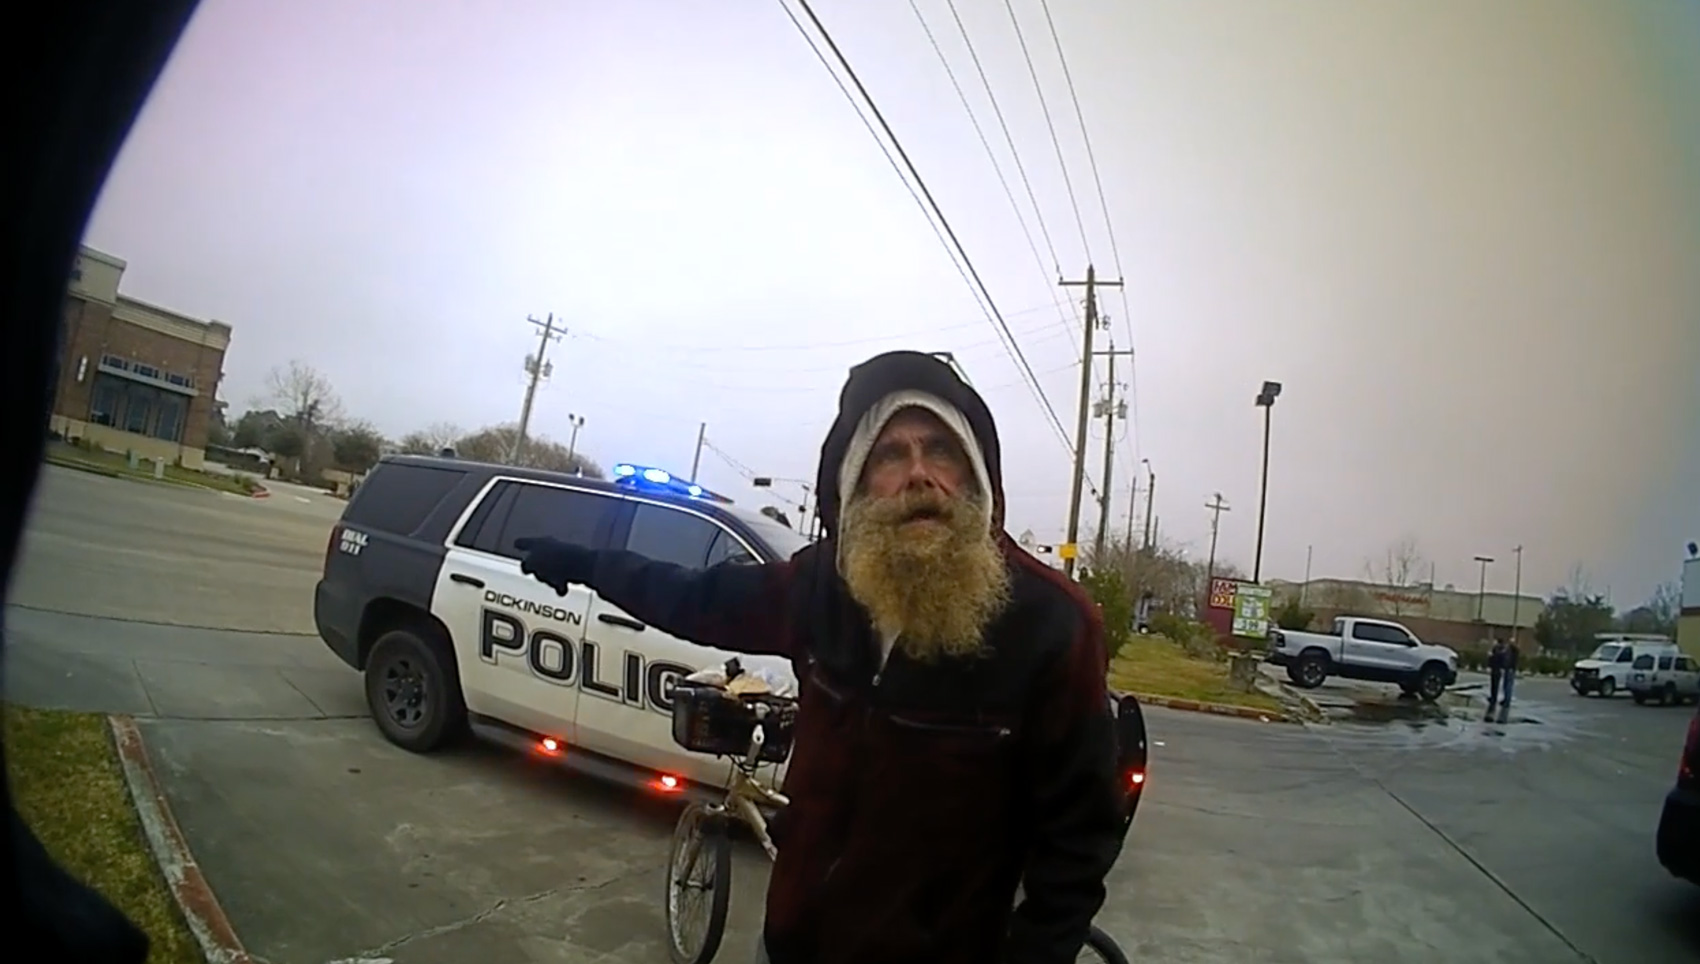 In a video screenshot, Michael Scurlock speaks with Dickinson Police Officer Michael Kinsley during a bike crash investigation Feb. 26, 2022, in Dickinson. Body camera footage subsequently shows Kinsley throwing Scurlock to the ground